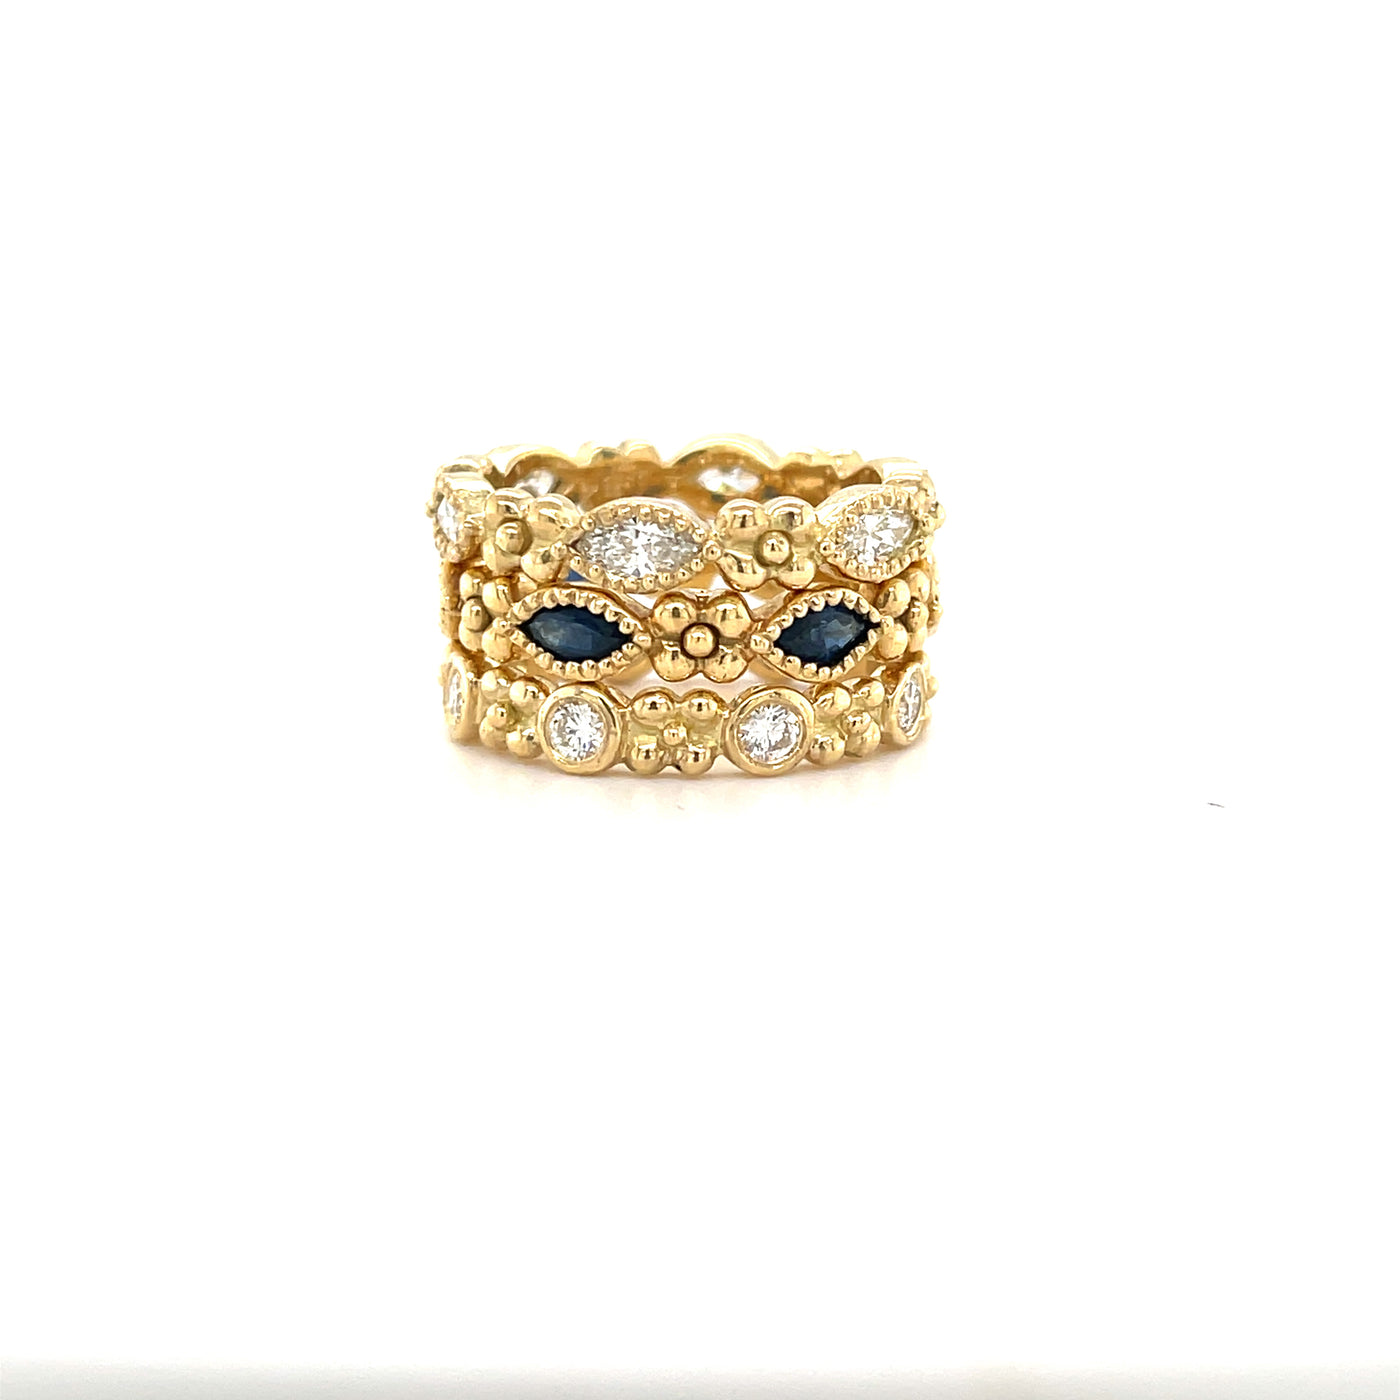 Wildberry Band in 18k Gold with Diamonds - Lauren Sigman Collection